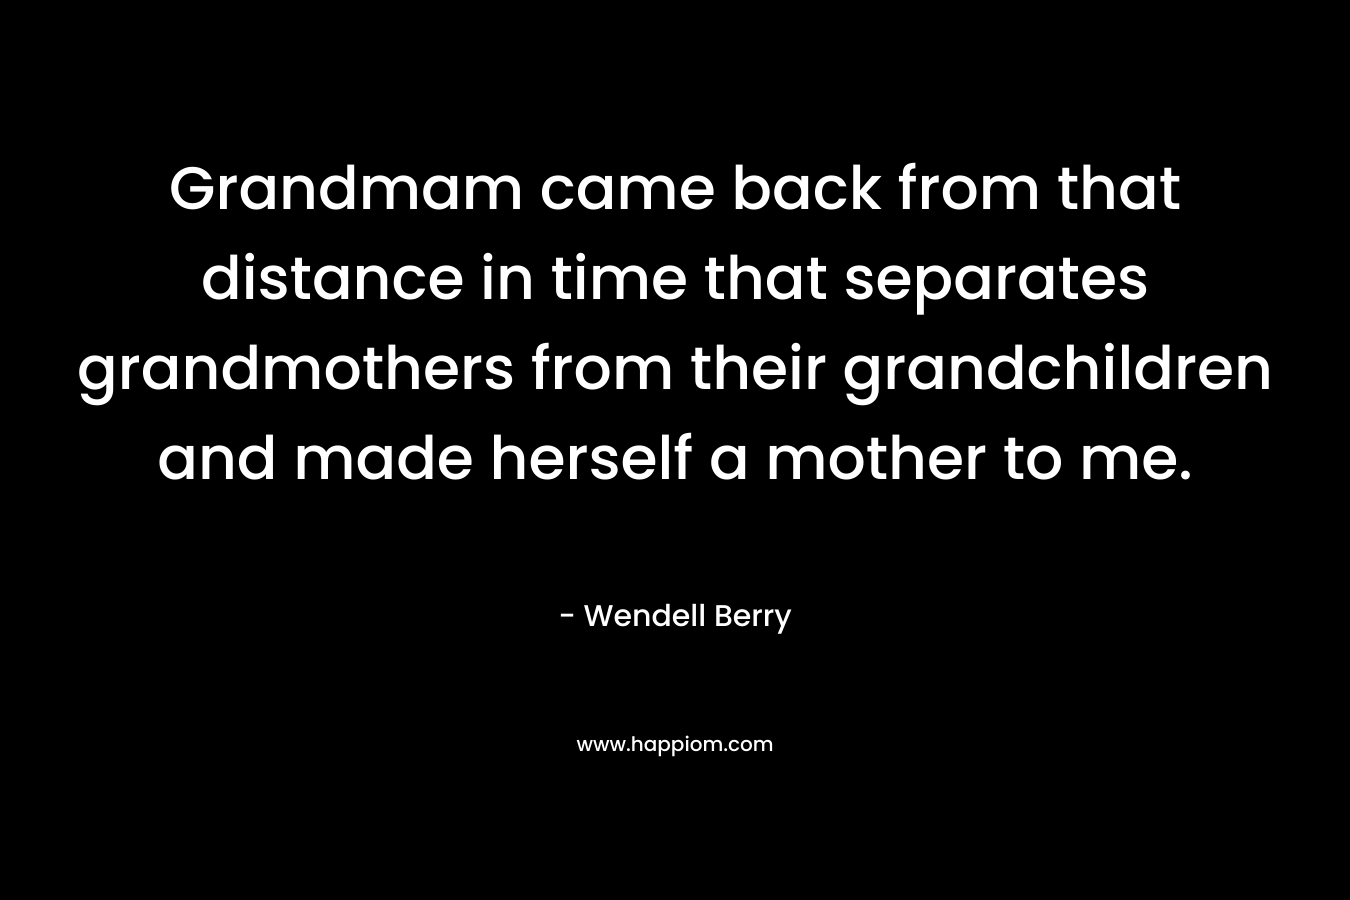 Grandmam came back from that distance in time that separates grandmothers from their grandchildren and made herself a mother to me. – Wendell Berry